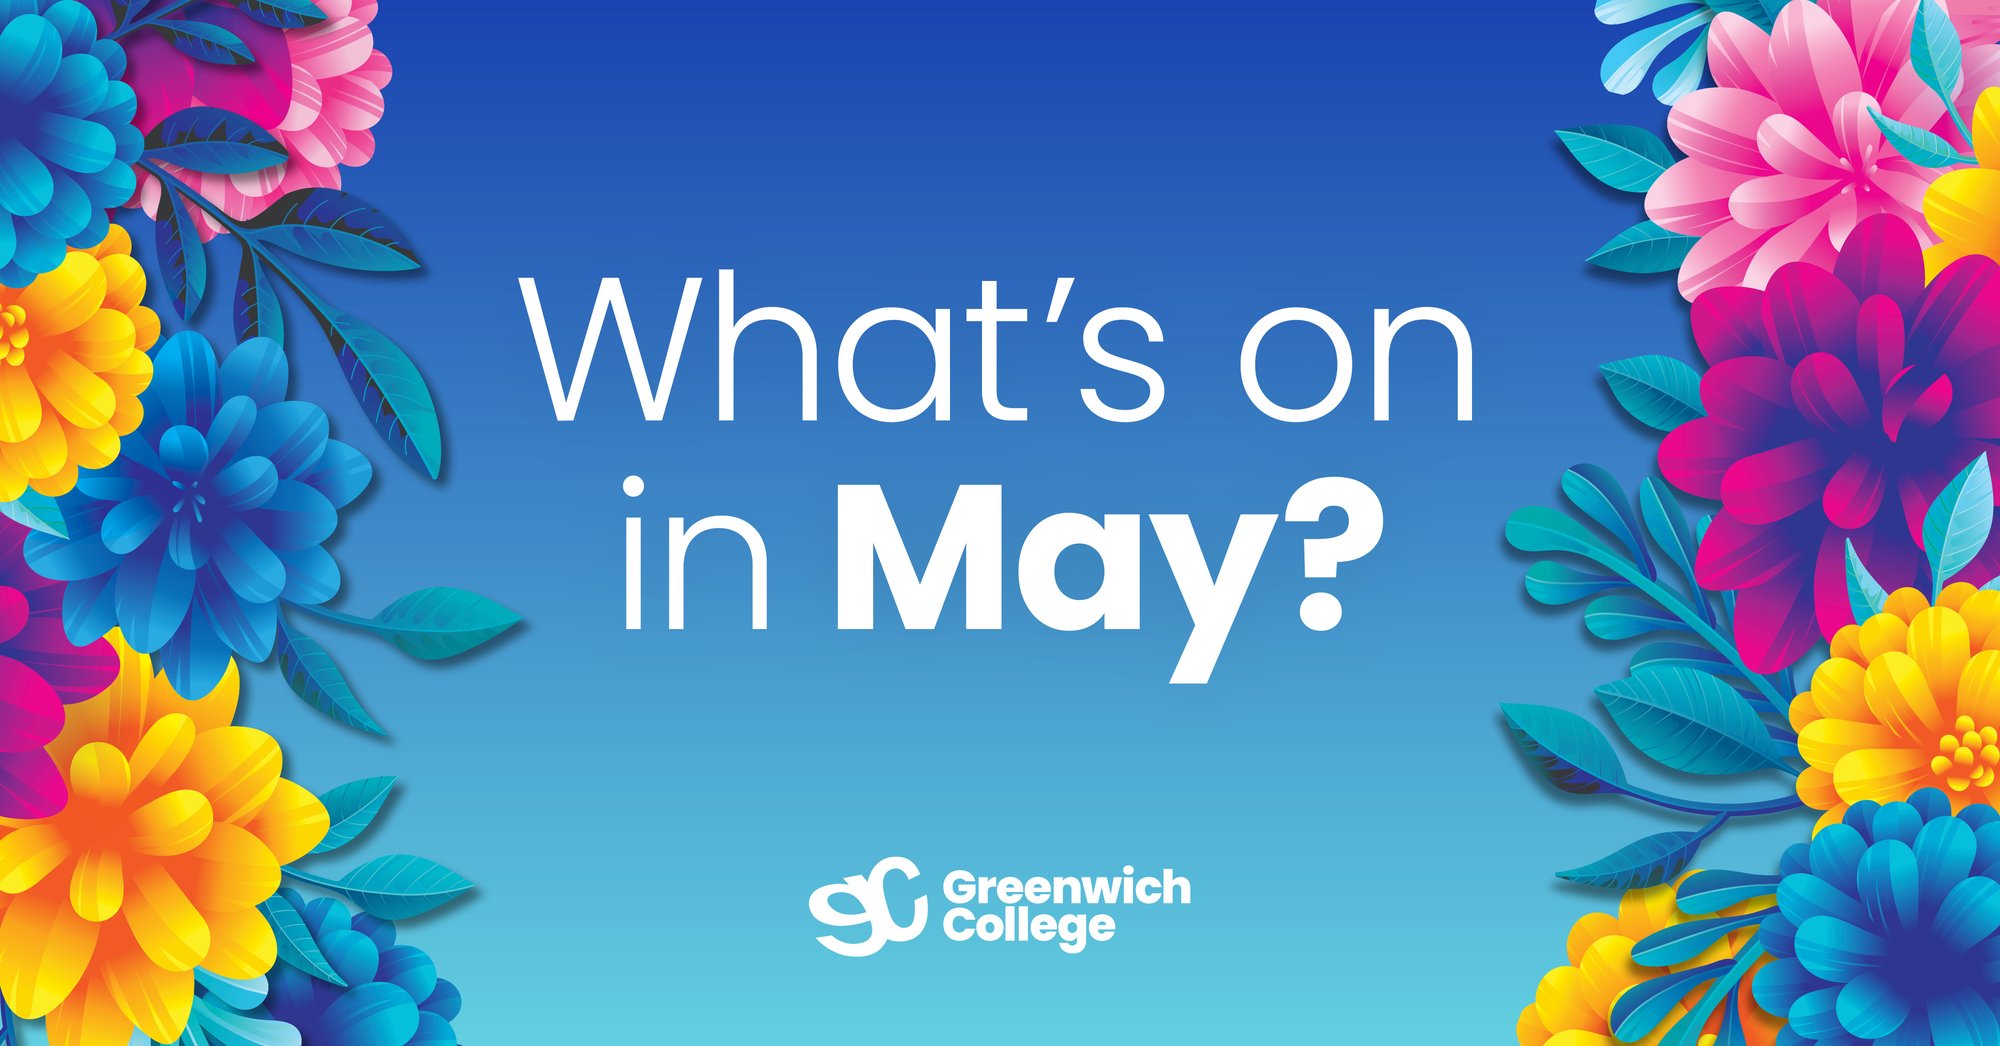 01_Greenwich_What’s_on_in_May_EDM_Banner_Apr2024